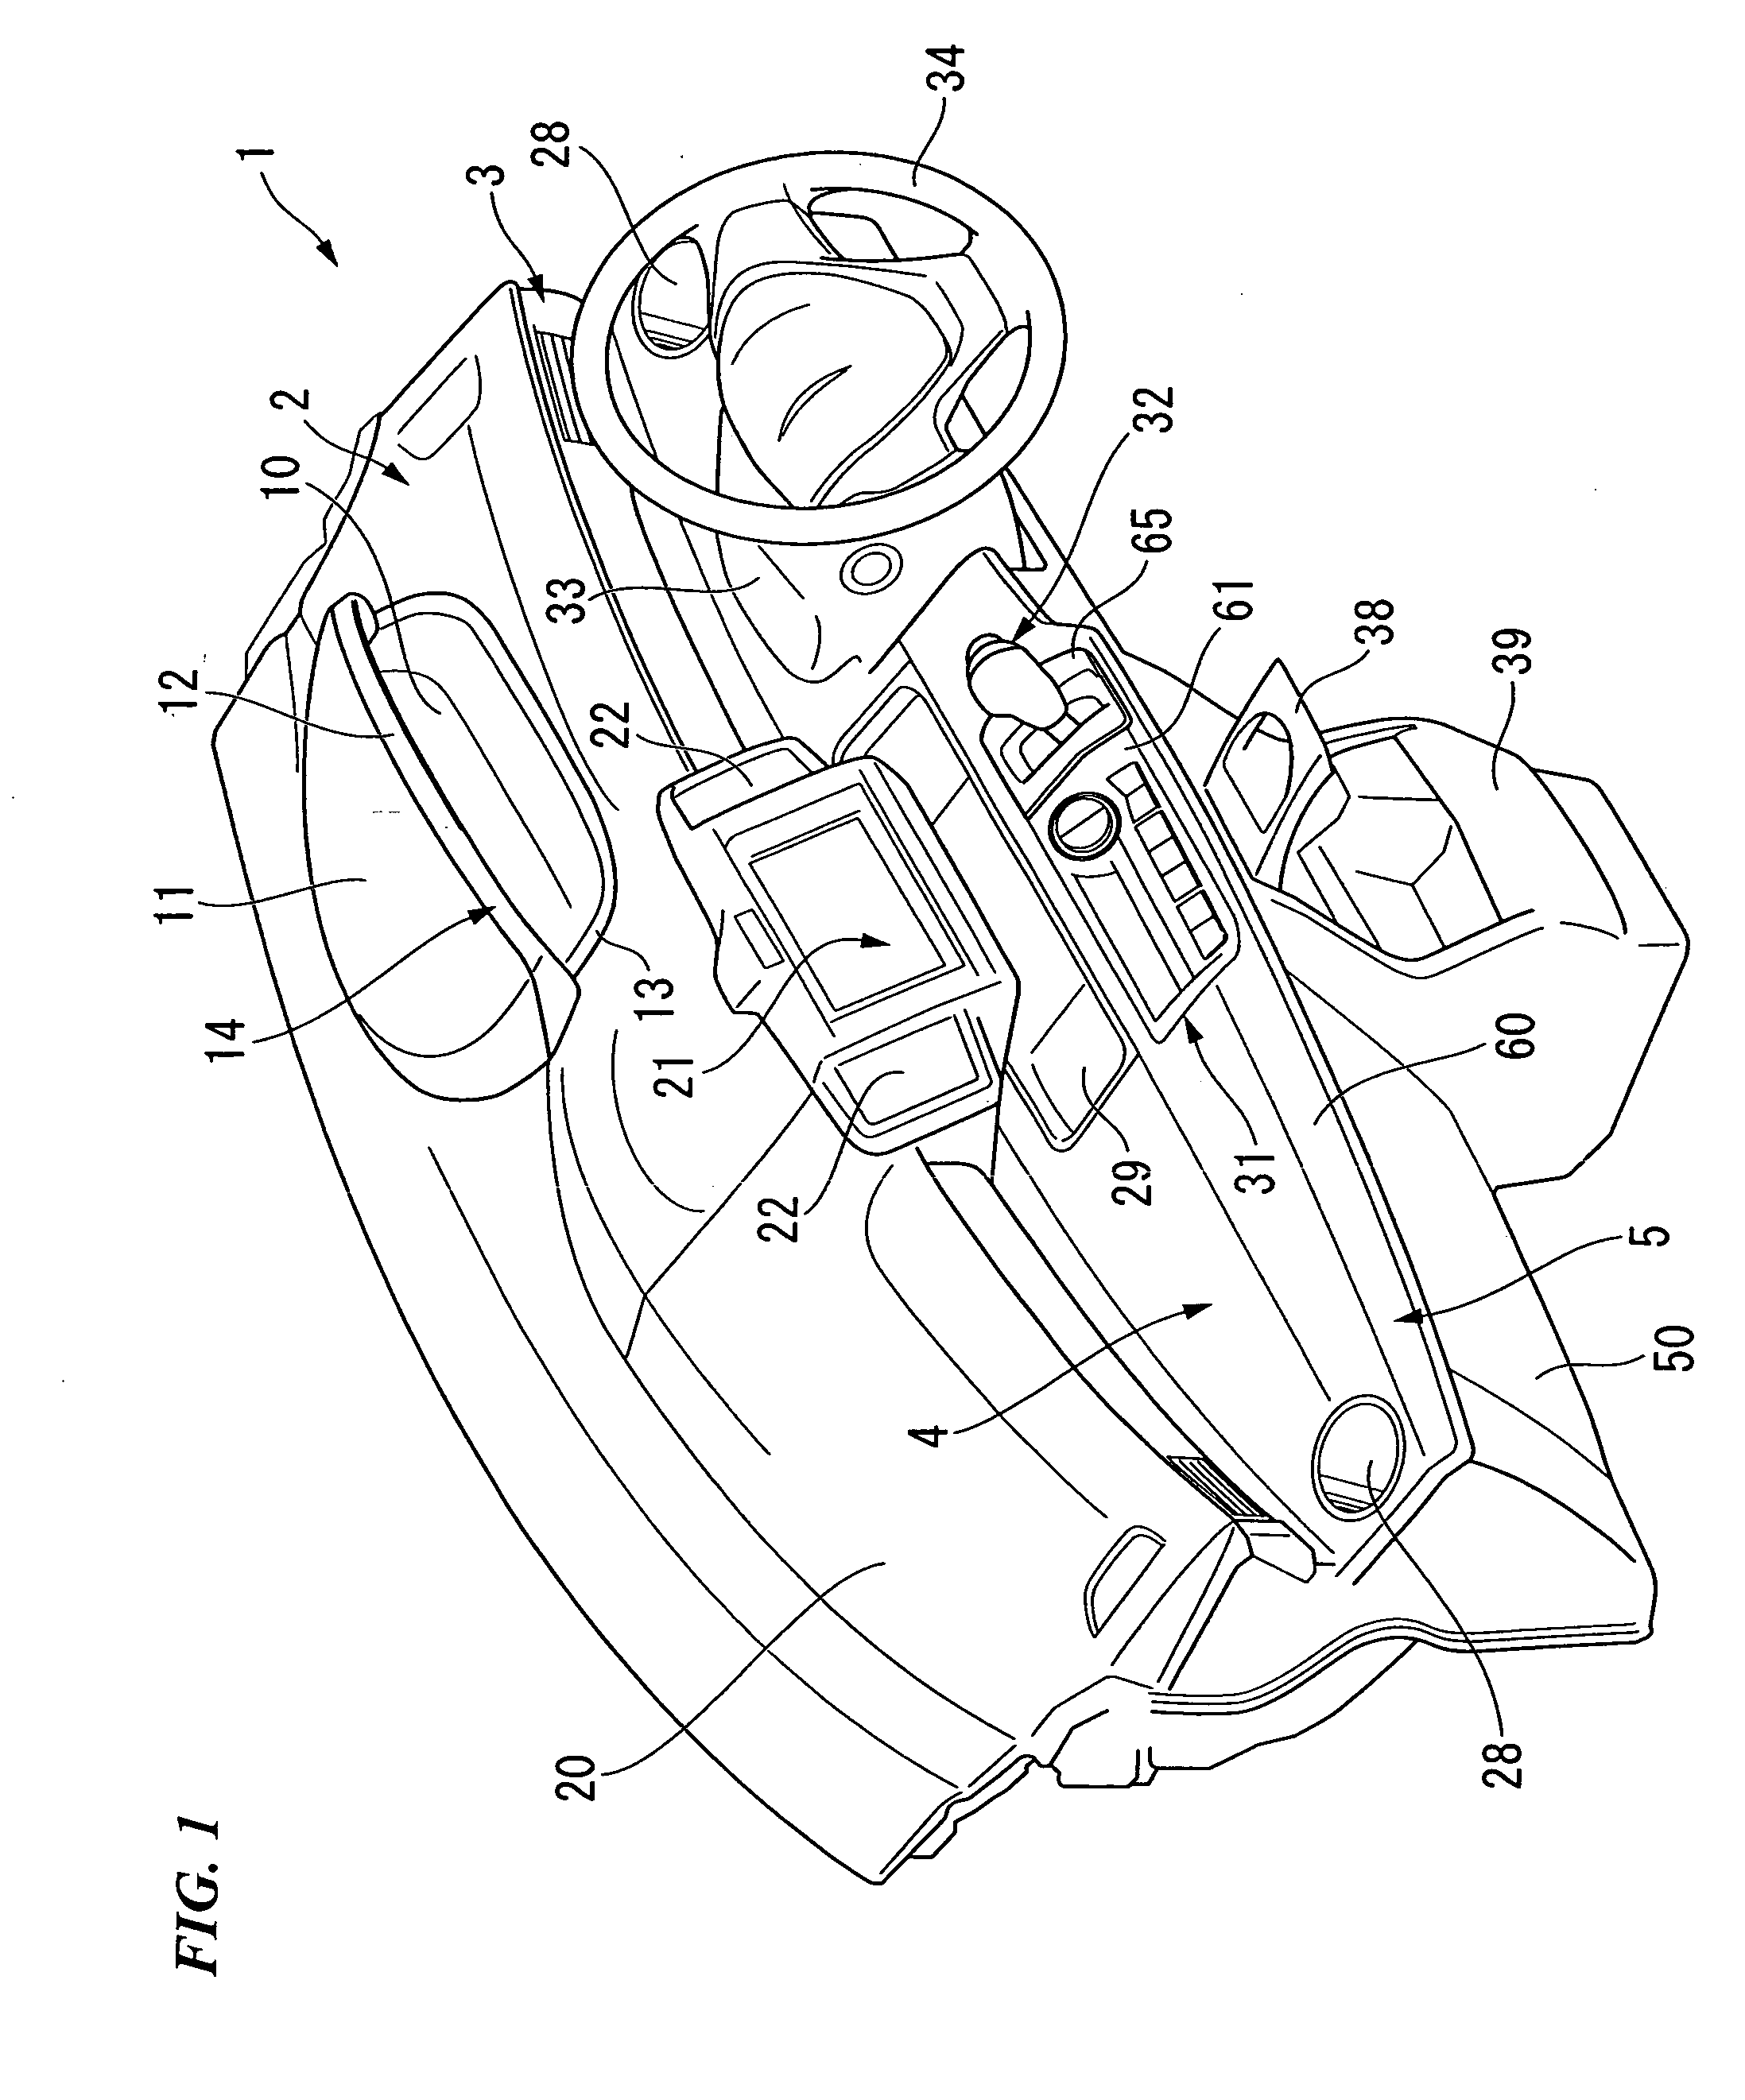 Instrument panel for vehicle and method for attaching vehicle-mounted device to instrument panel for vehicle